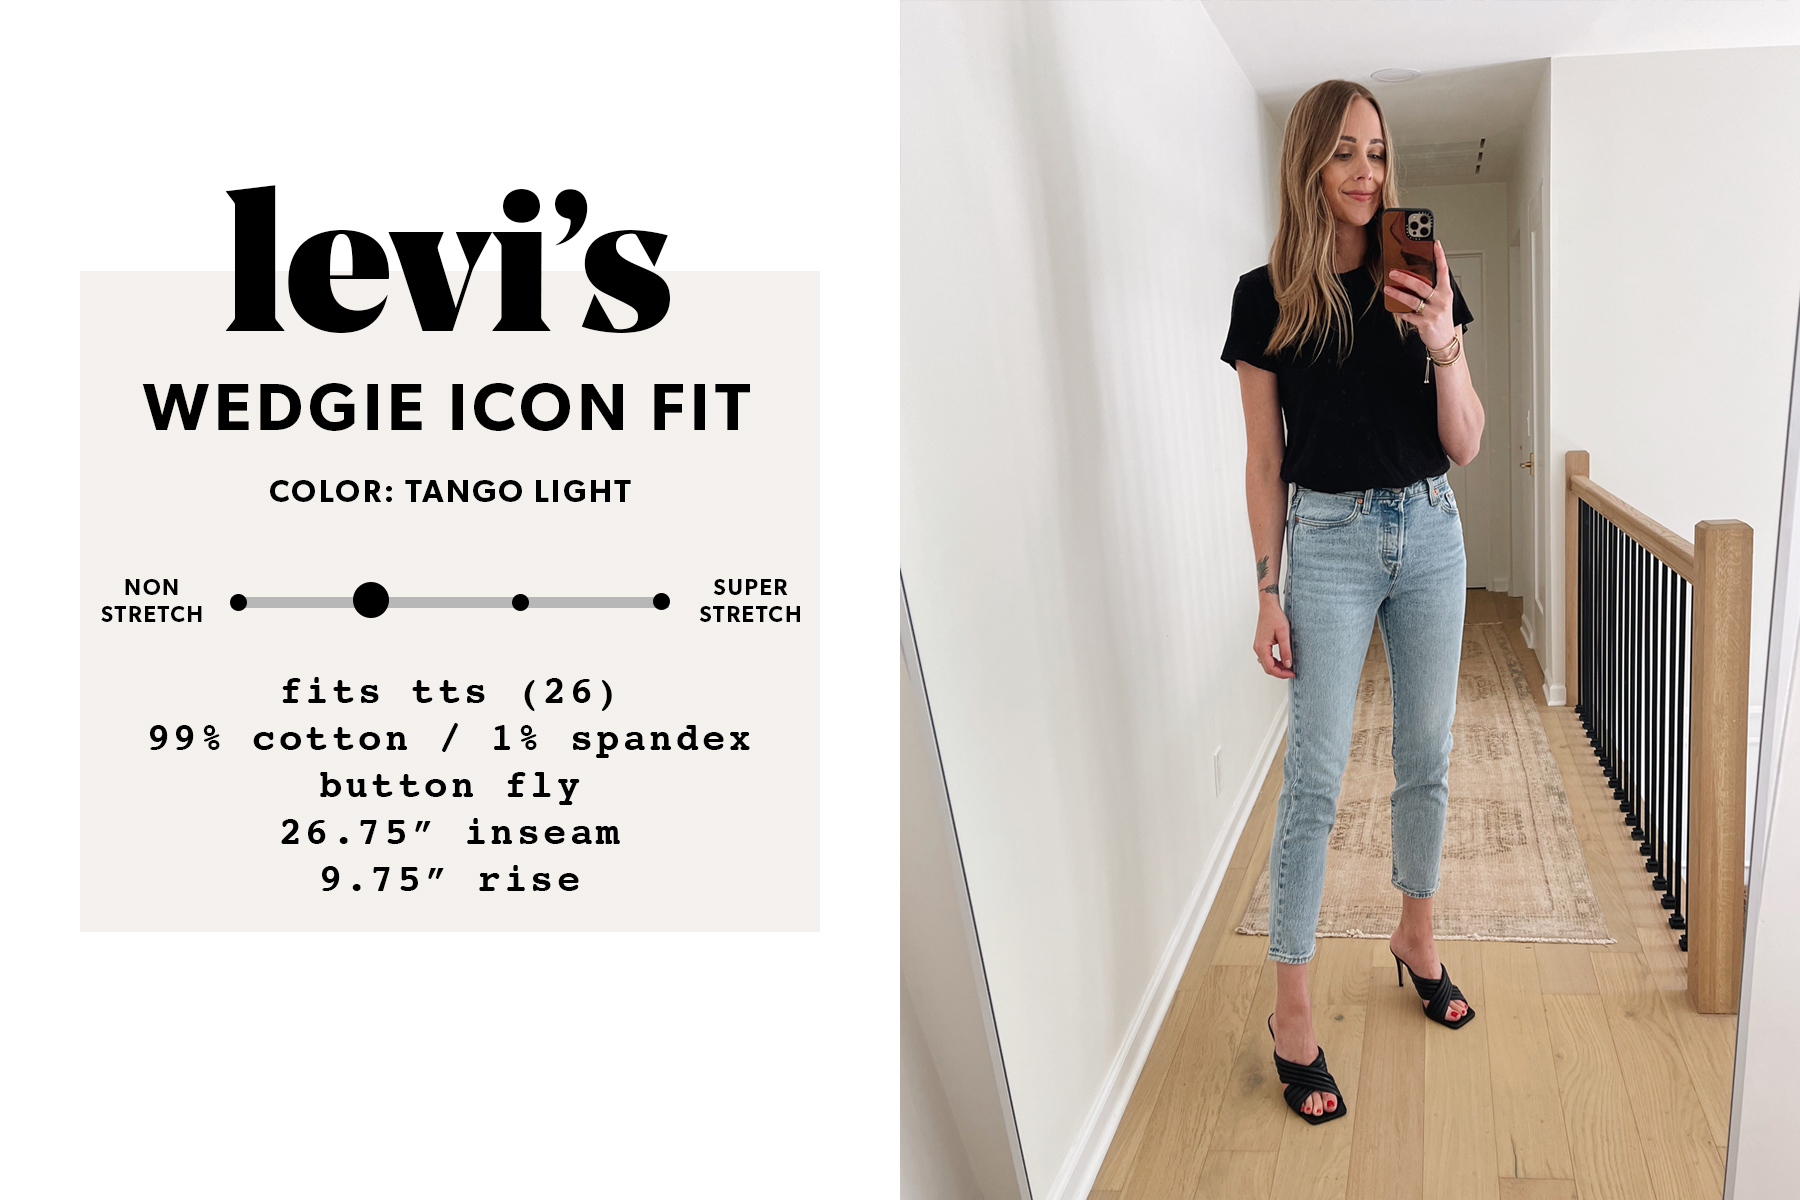 Moving about inference The Complete Guide to Buying Levi's Jeans for Women - Fashion Jackson